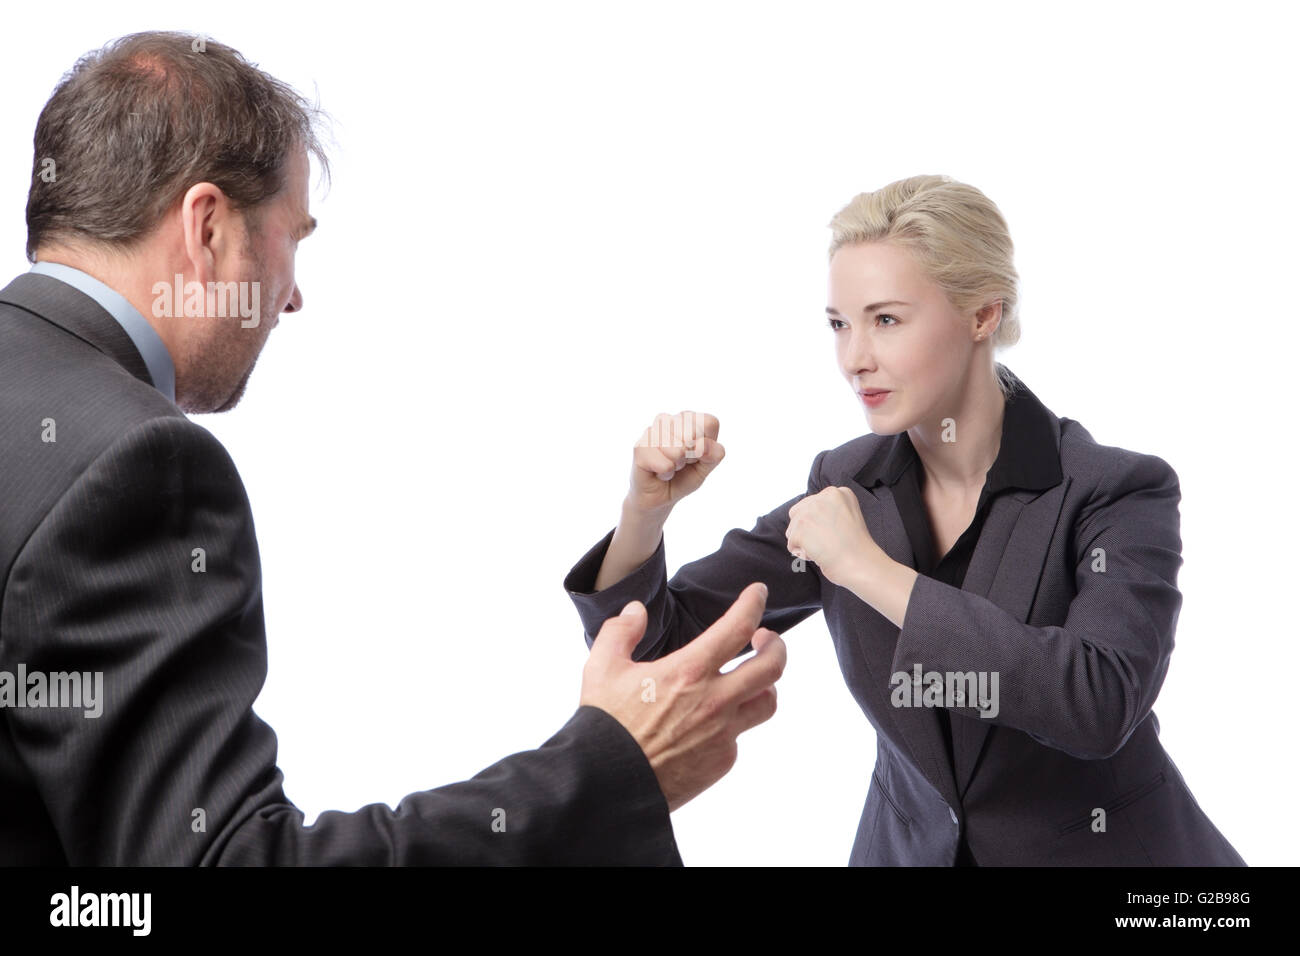 Studio shot of two co-workers wearing suits, fighting in the office, isolated on a white background. Stock Photo